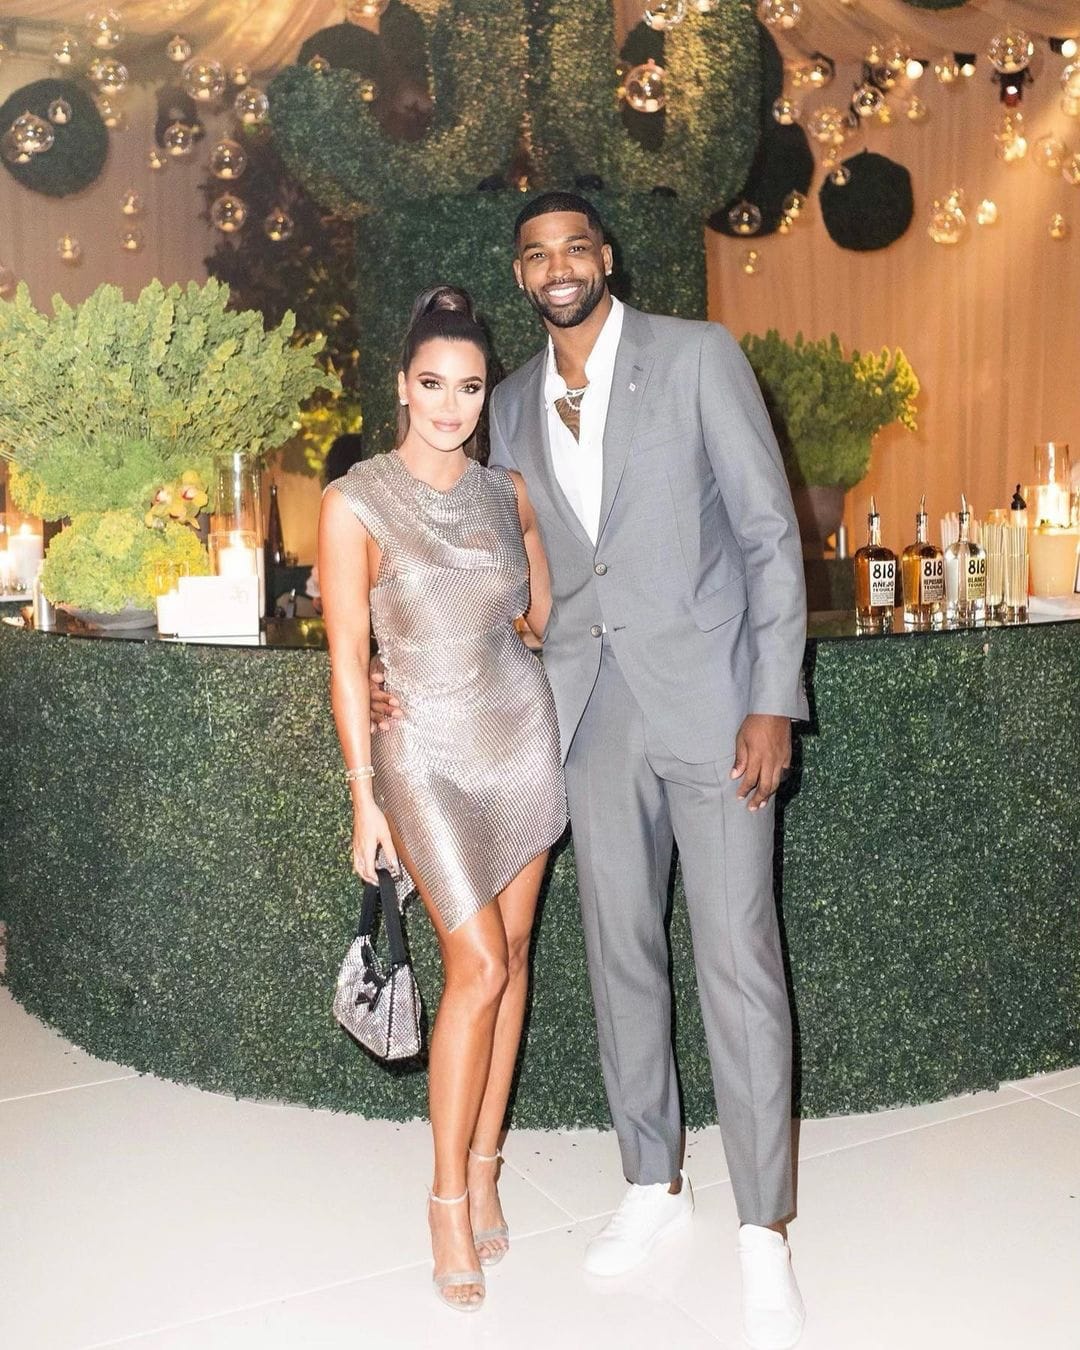 On-again, off-again couple Khloe Kardashian and Tristan Thompson had many ups and downs during the entirety of their relationship